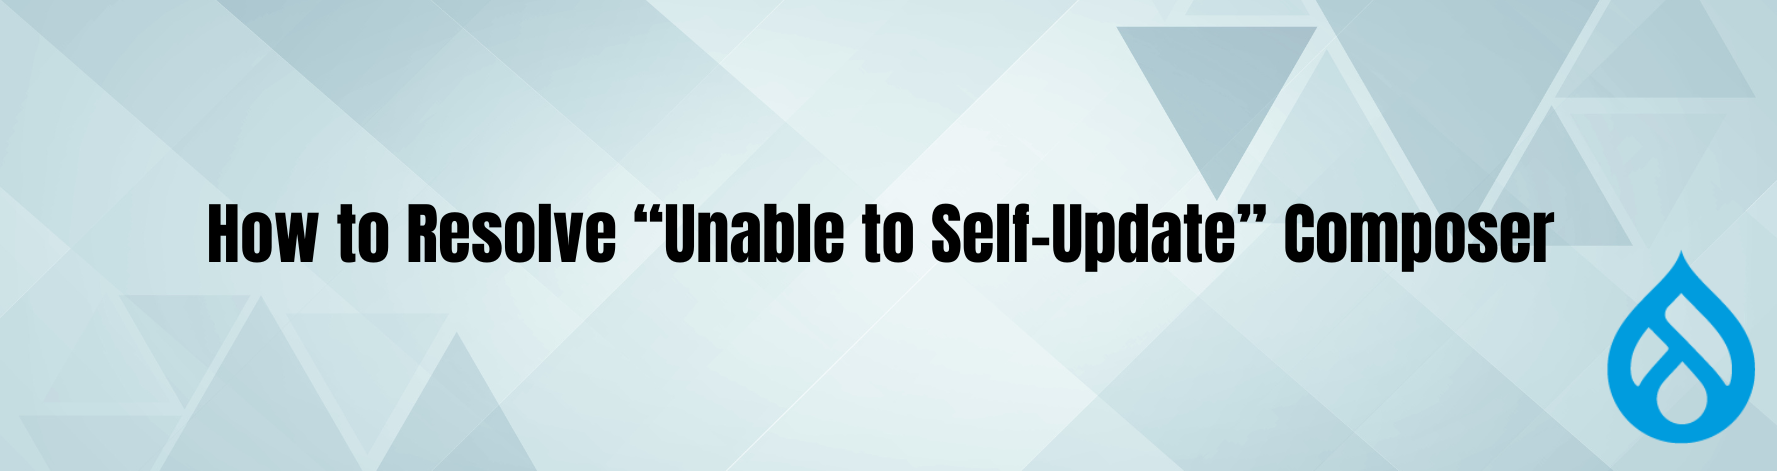 How to Resolve unable to self-update Composer